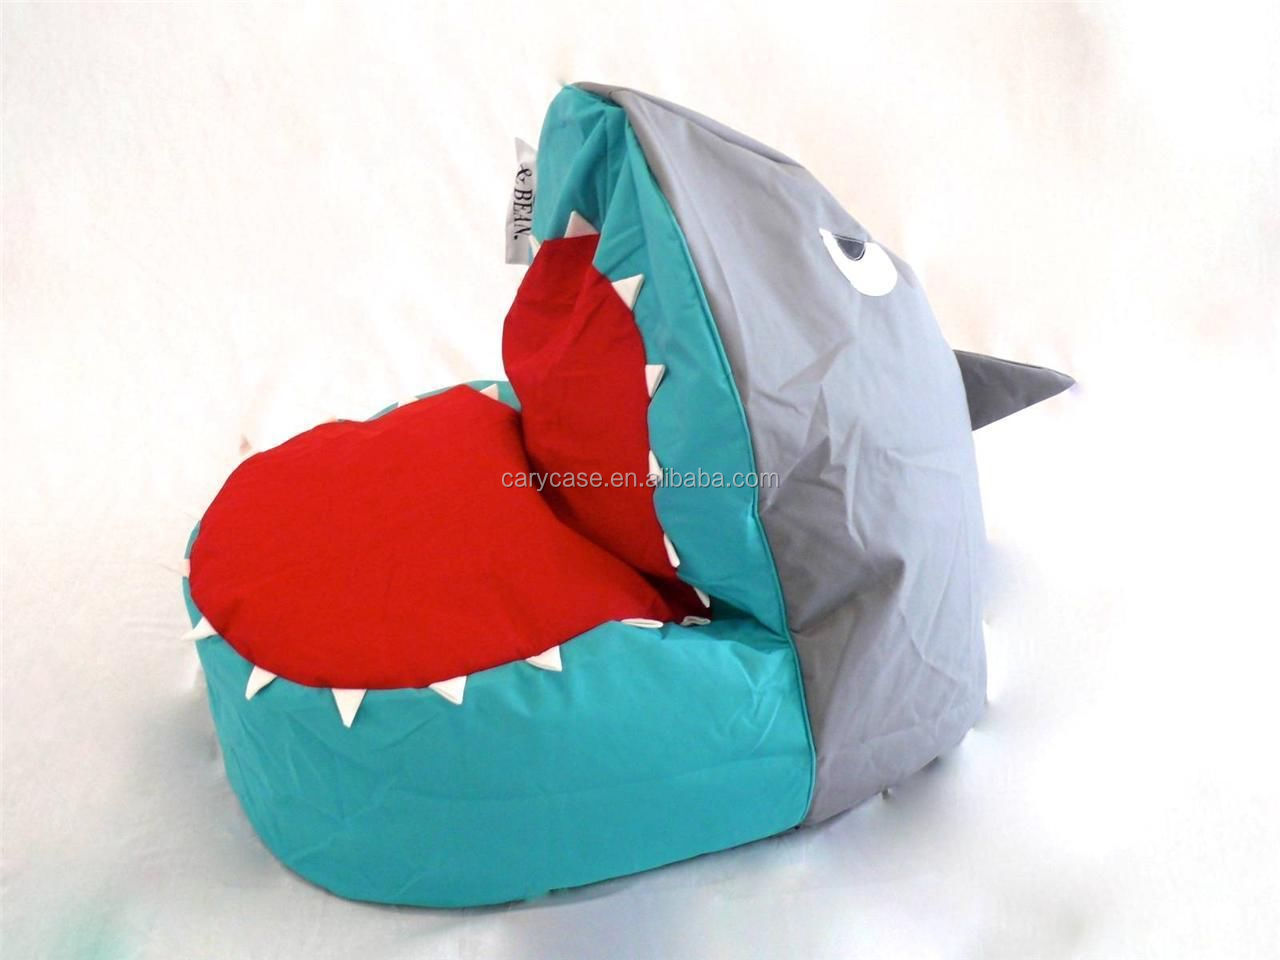 New Indoor Outdoor Kids Shark Beanbag Chair Cover Lounge Seat Blue